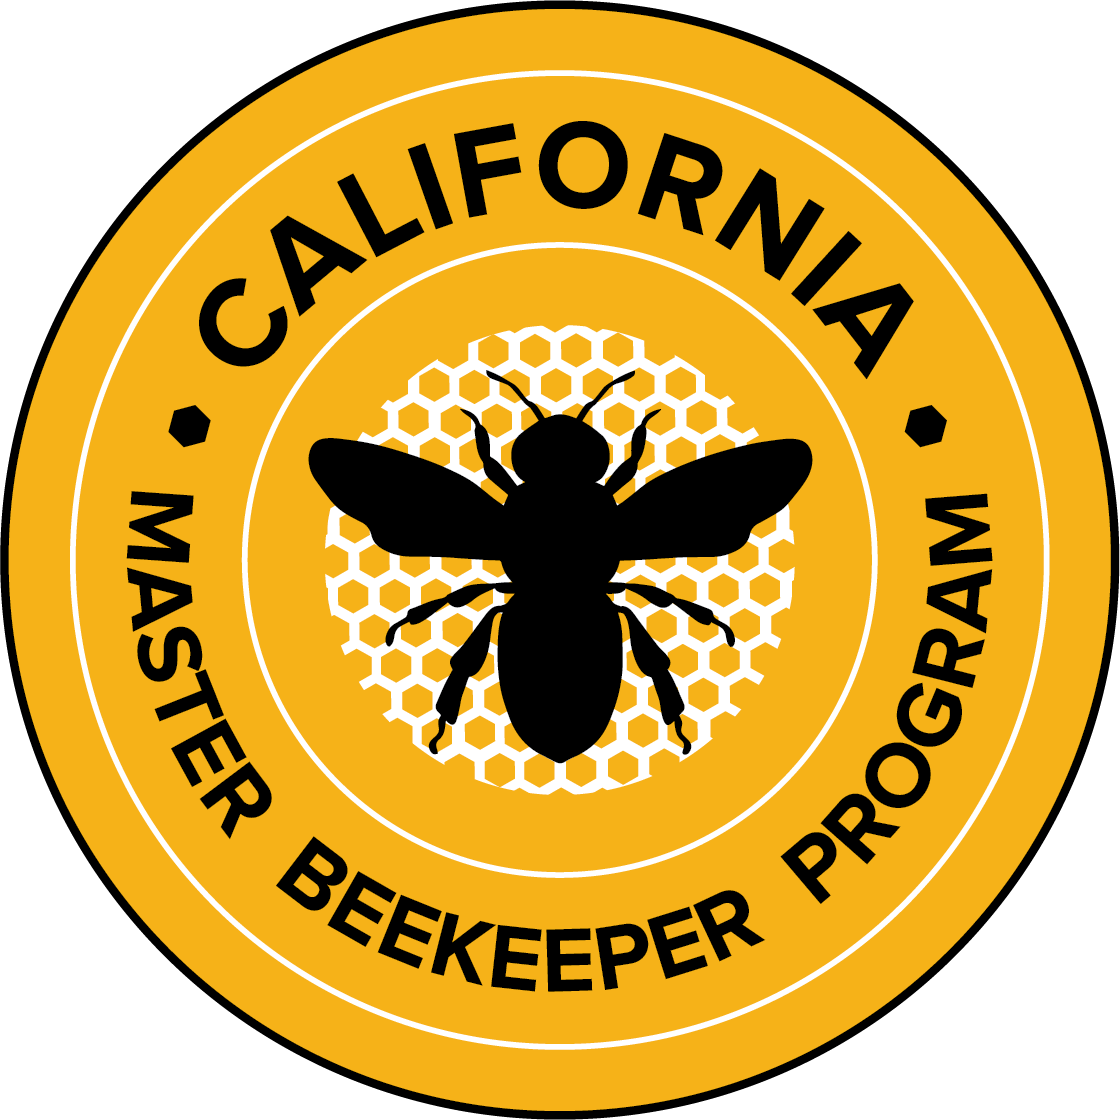 California Master Beekeeper Program | Using science based information to educate stewards and ambassadors for honey bees and beekeeping